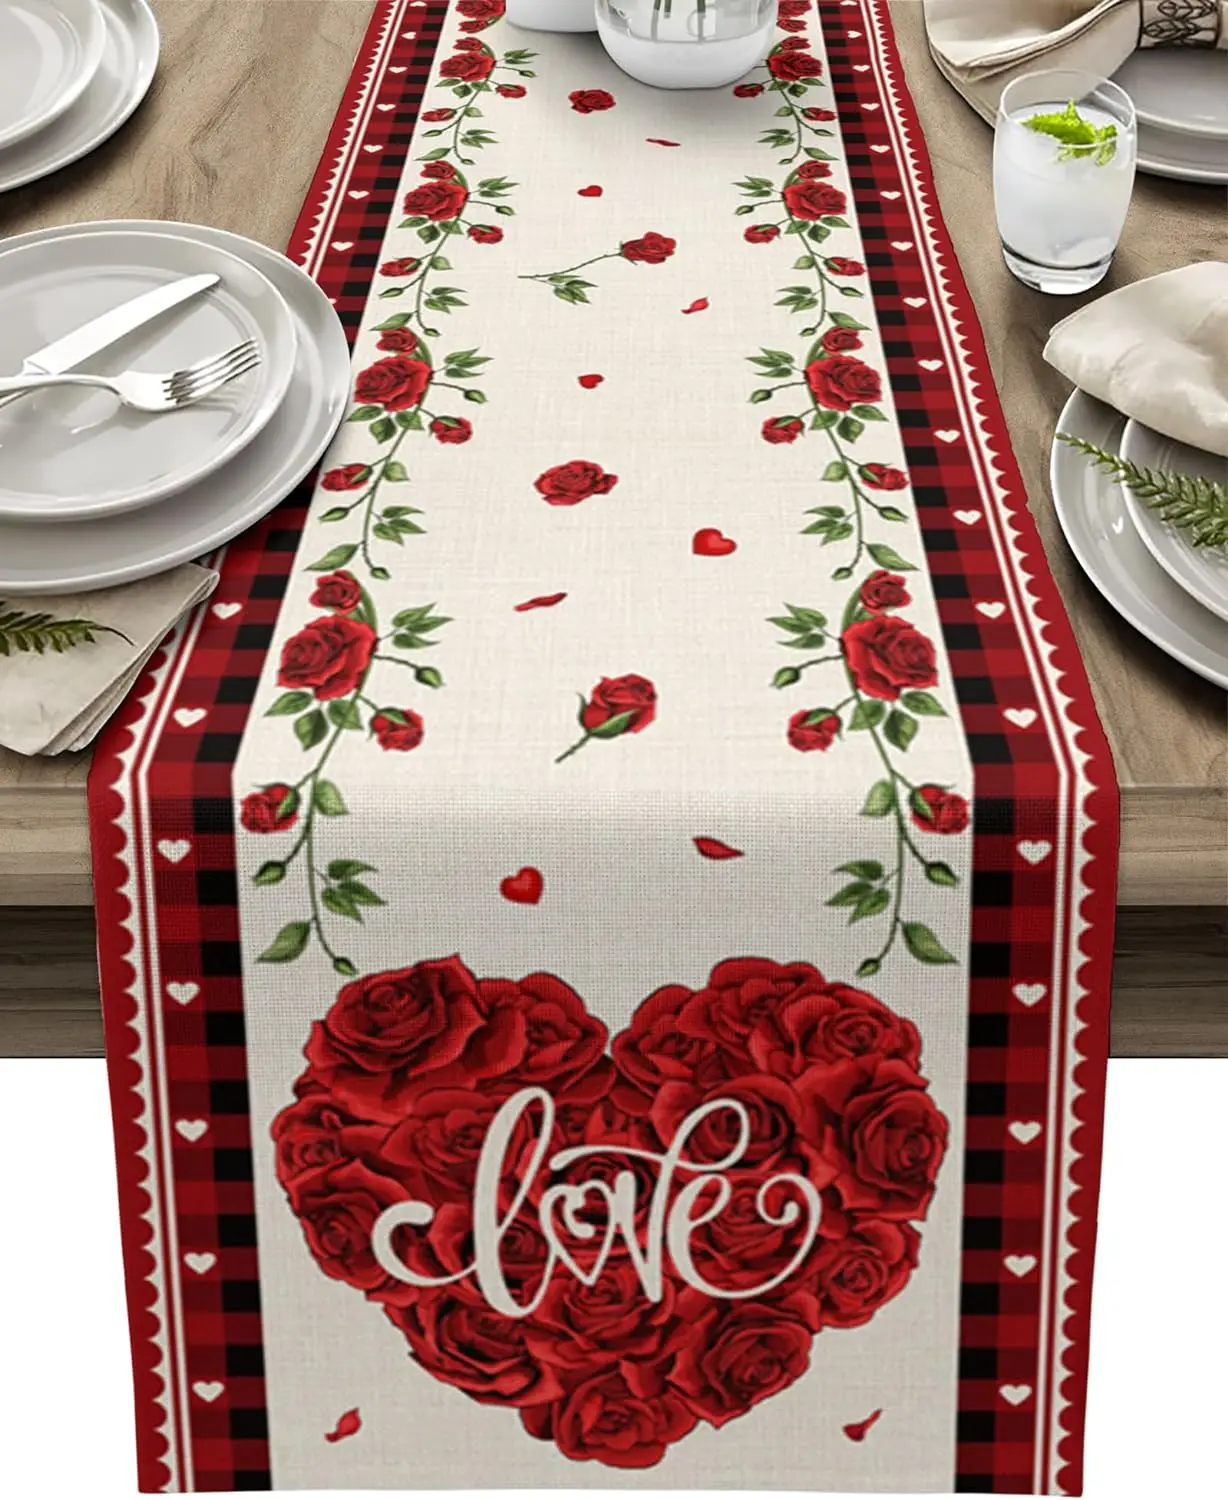 

Valentine's Day Love Rose Buffalo Plaid Linen Table Runners Dresser Scarves Dining Table Decor for Wedding Holiday Party Decor